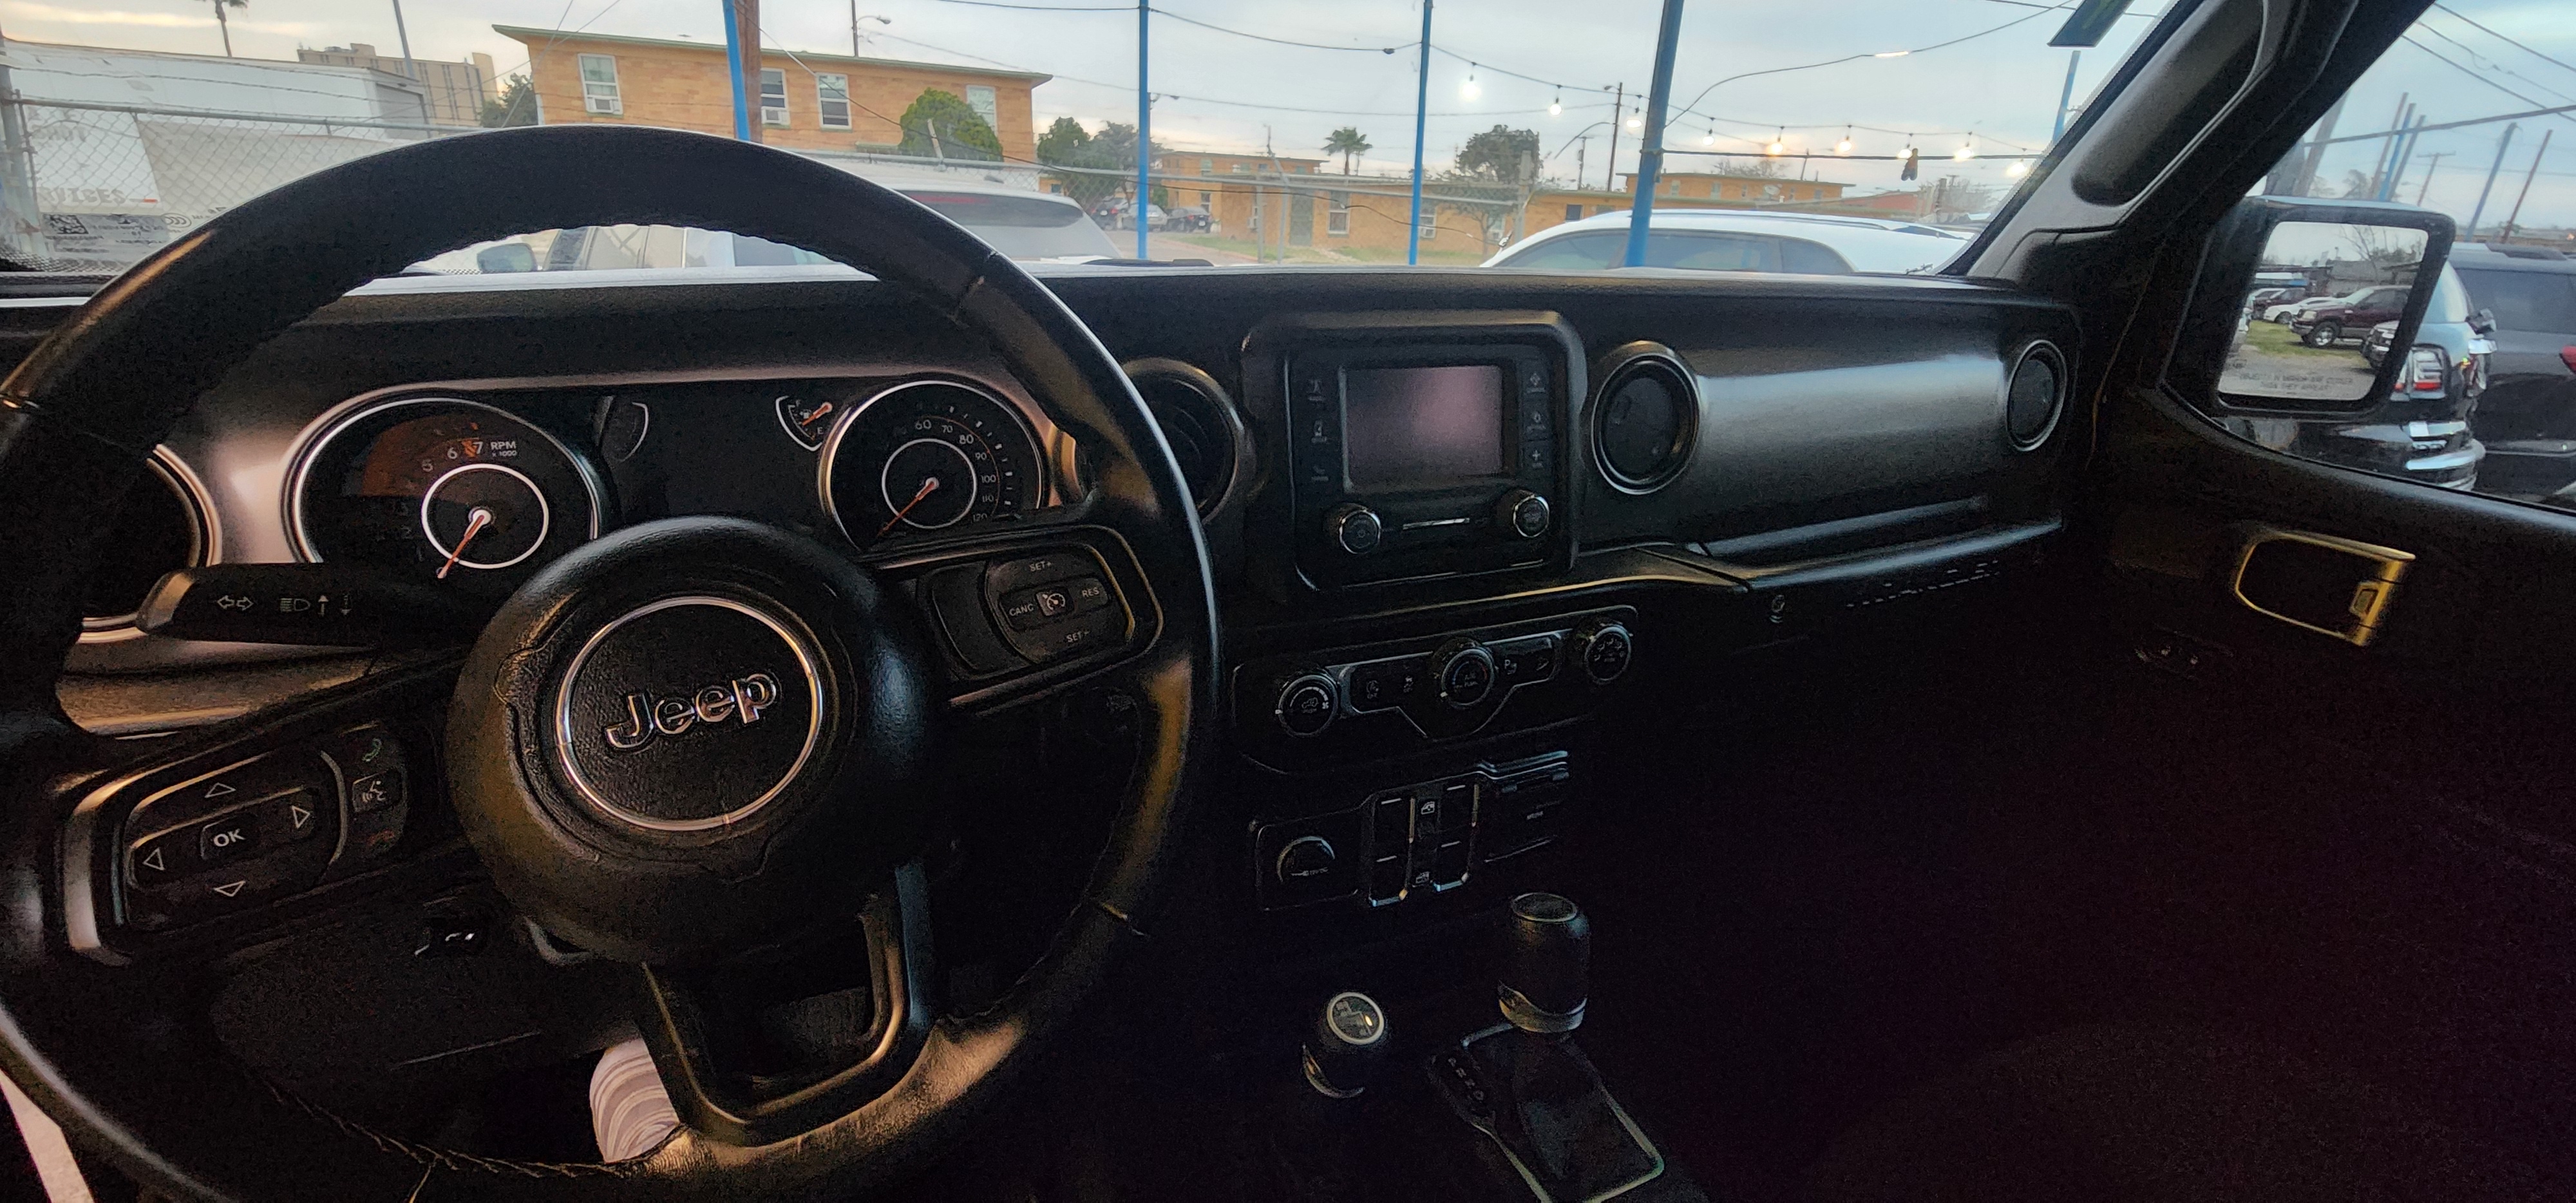 Used Jeep Wrangler Unlimited for Sale in Laredo, TX 